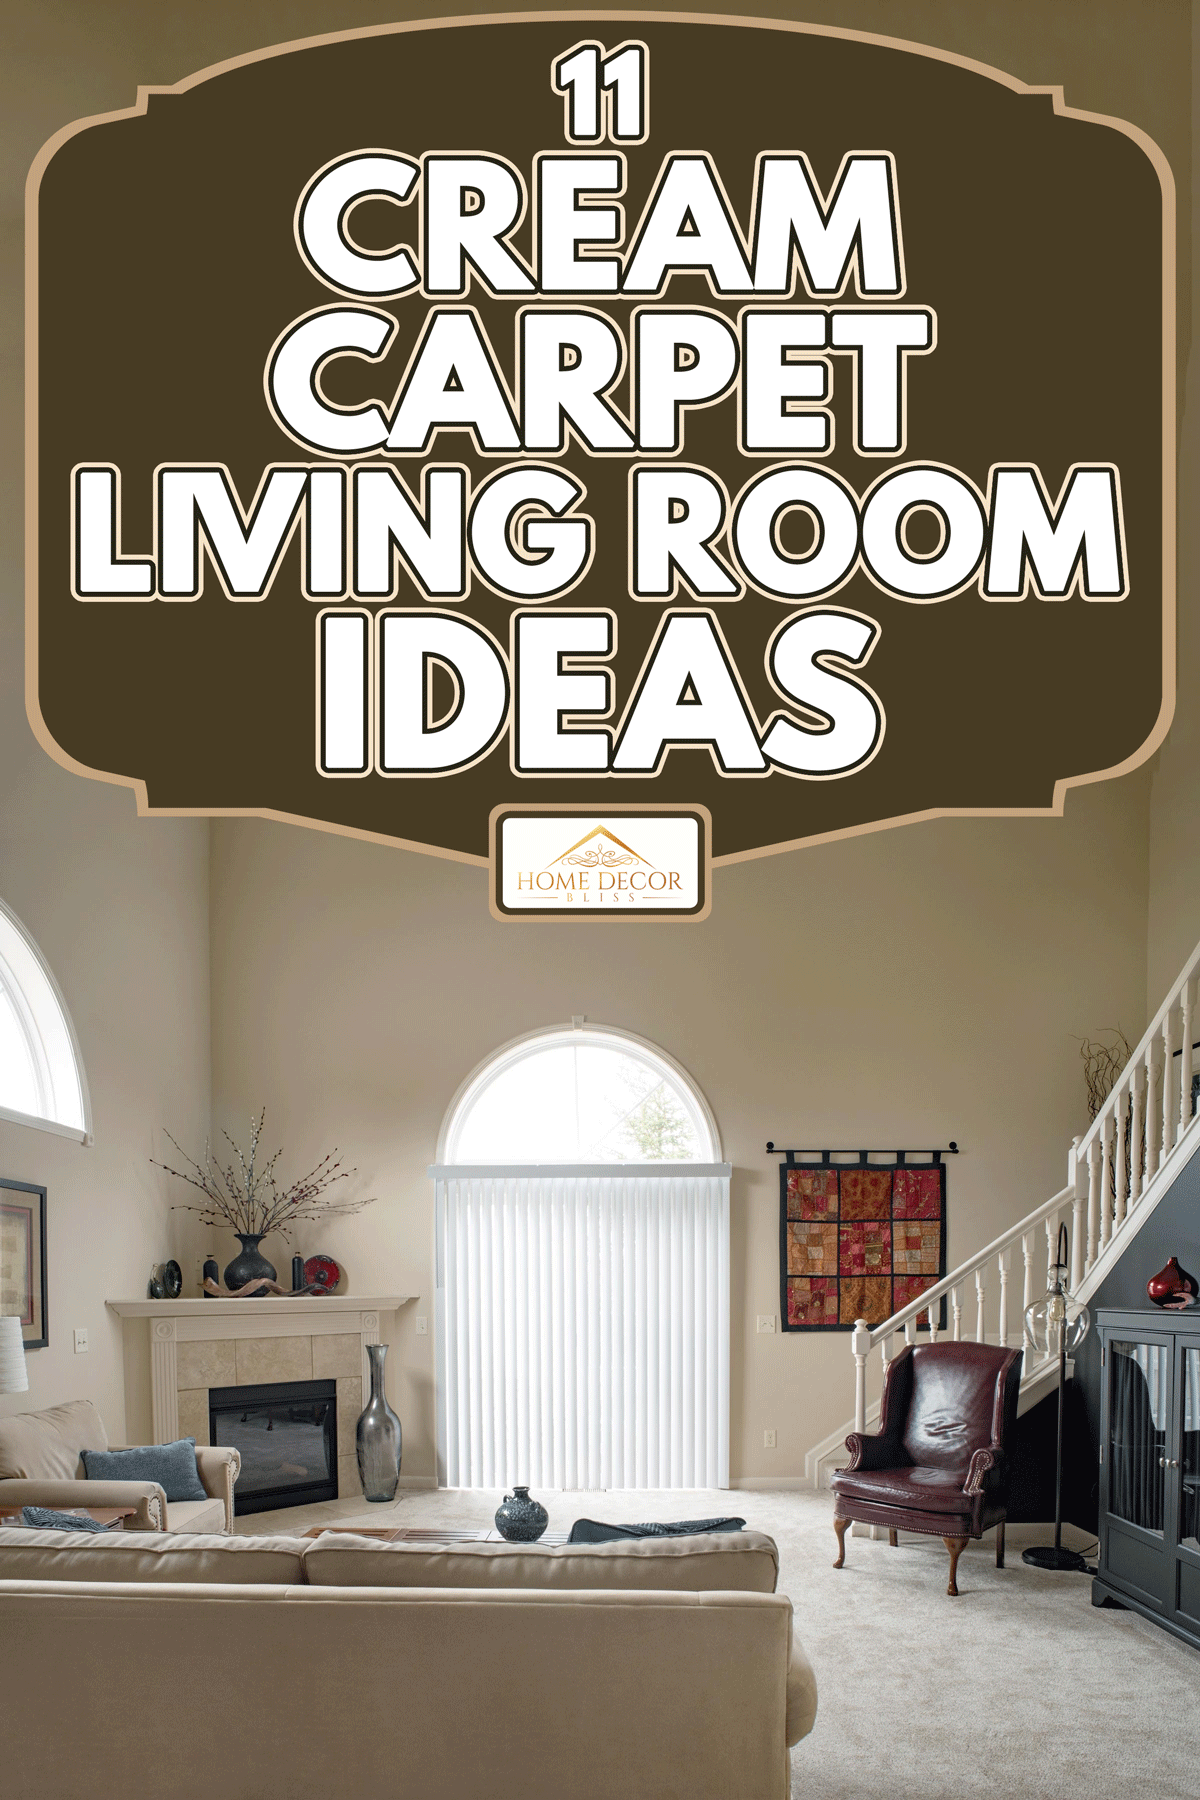 A condo living room in neutral colors with cathedral ceiling and arched windows, 11 Cream Carpet Living Room Ideas